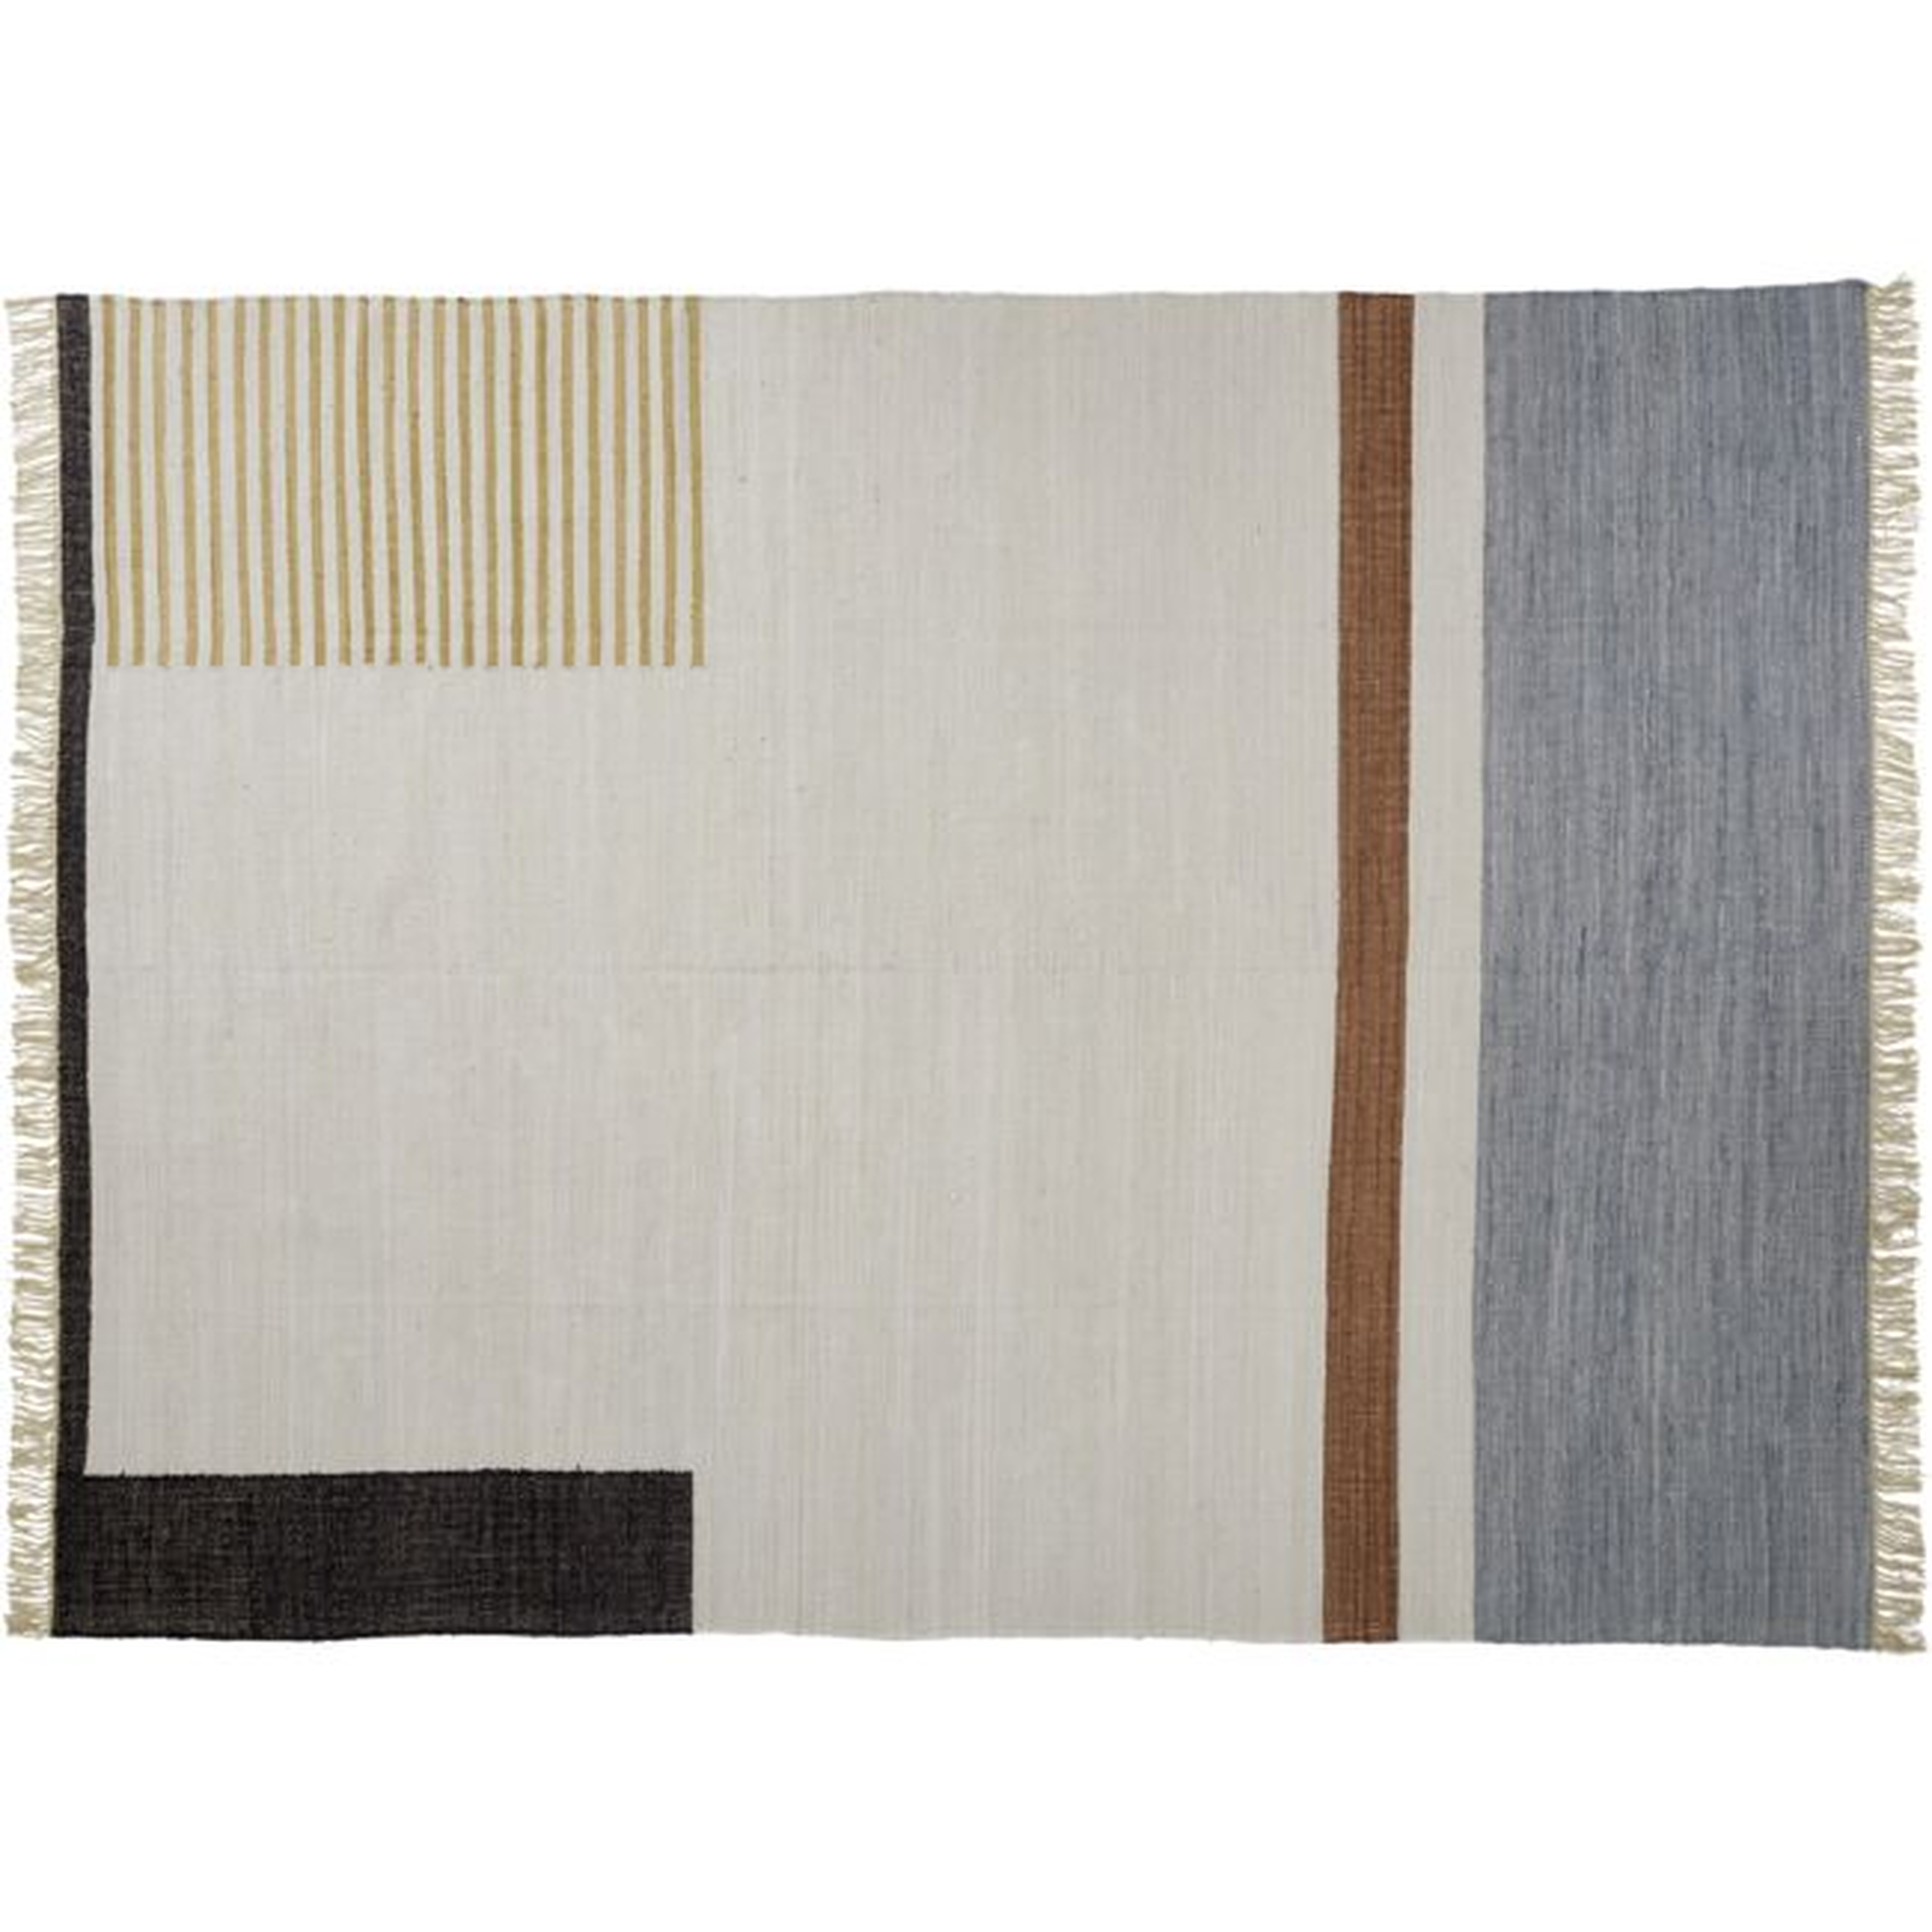 Array Handwoven Recycled Area Rug 9'x12' - CB2